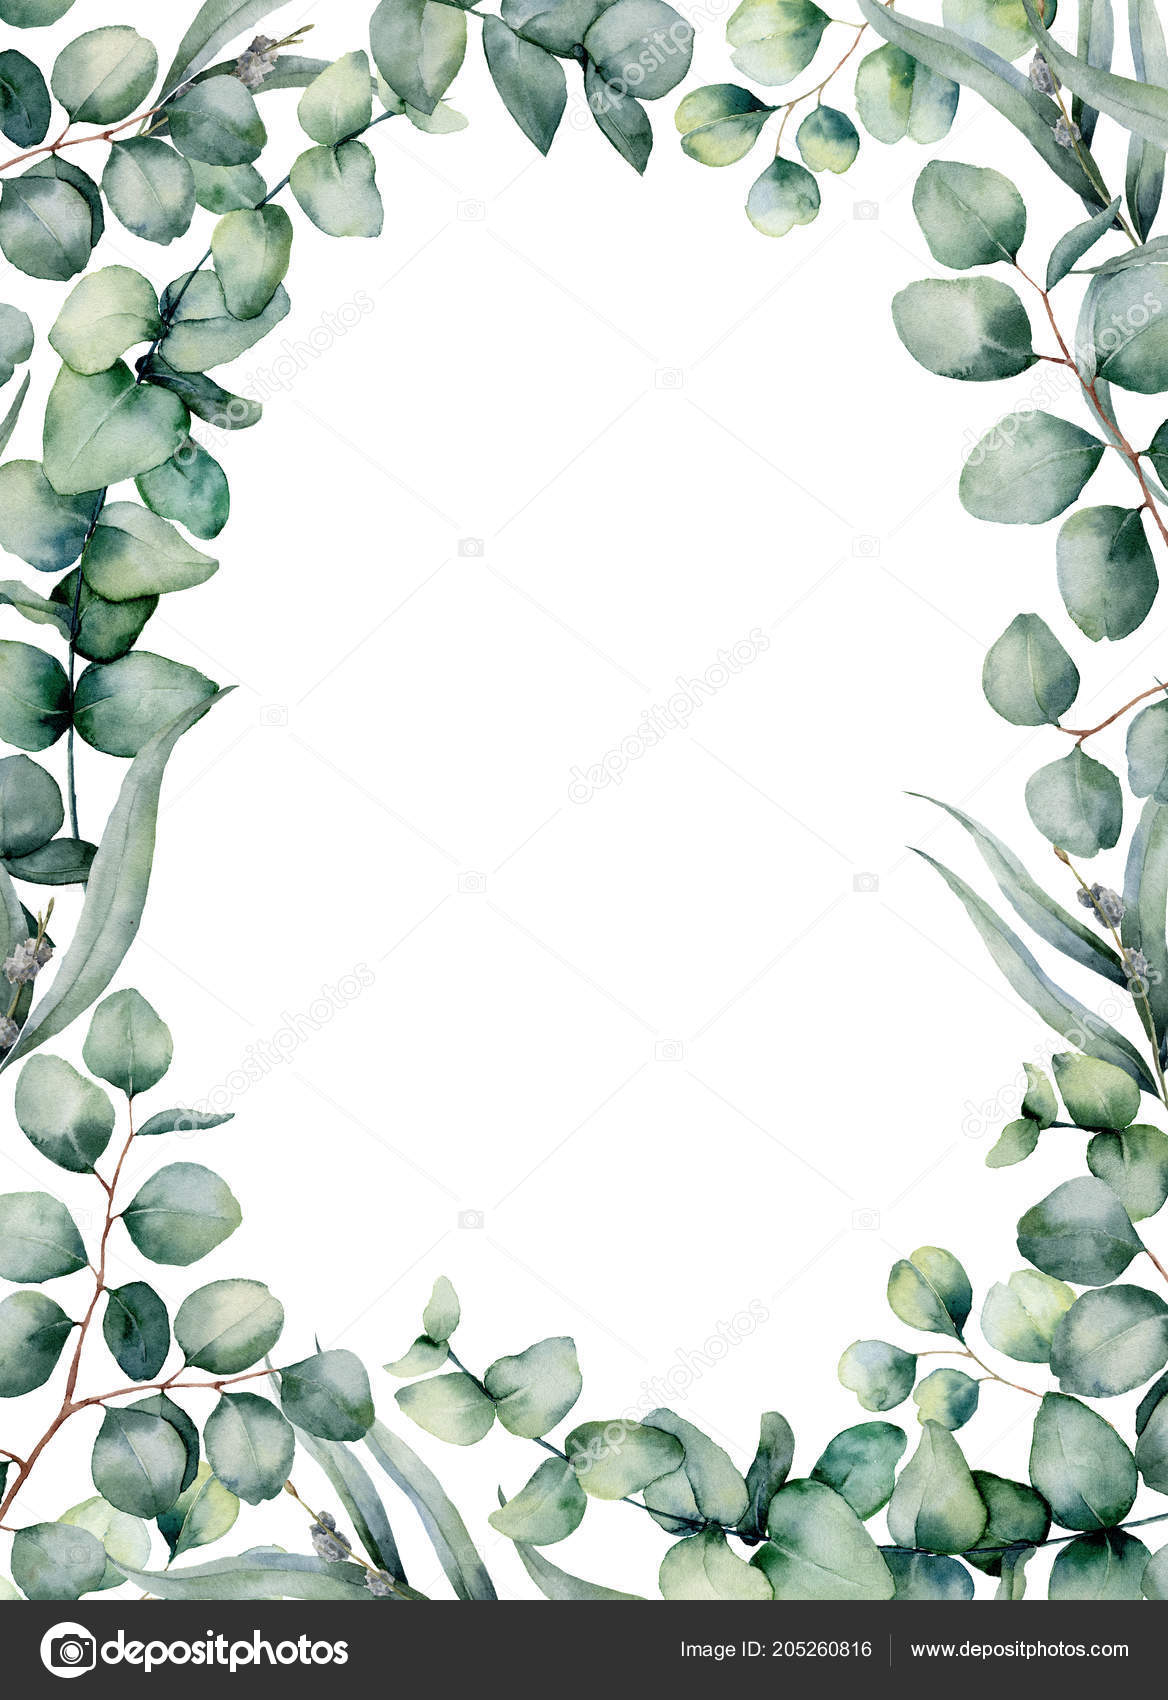 Watercolor frame with eucalyptus leaves. Hand painted baby, seeded and